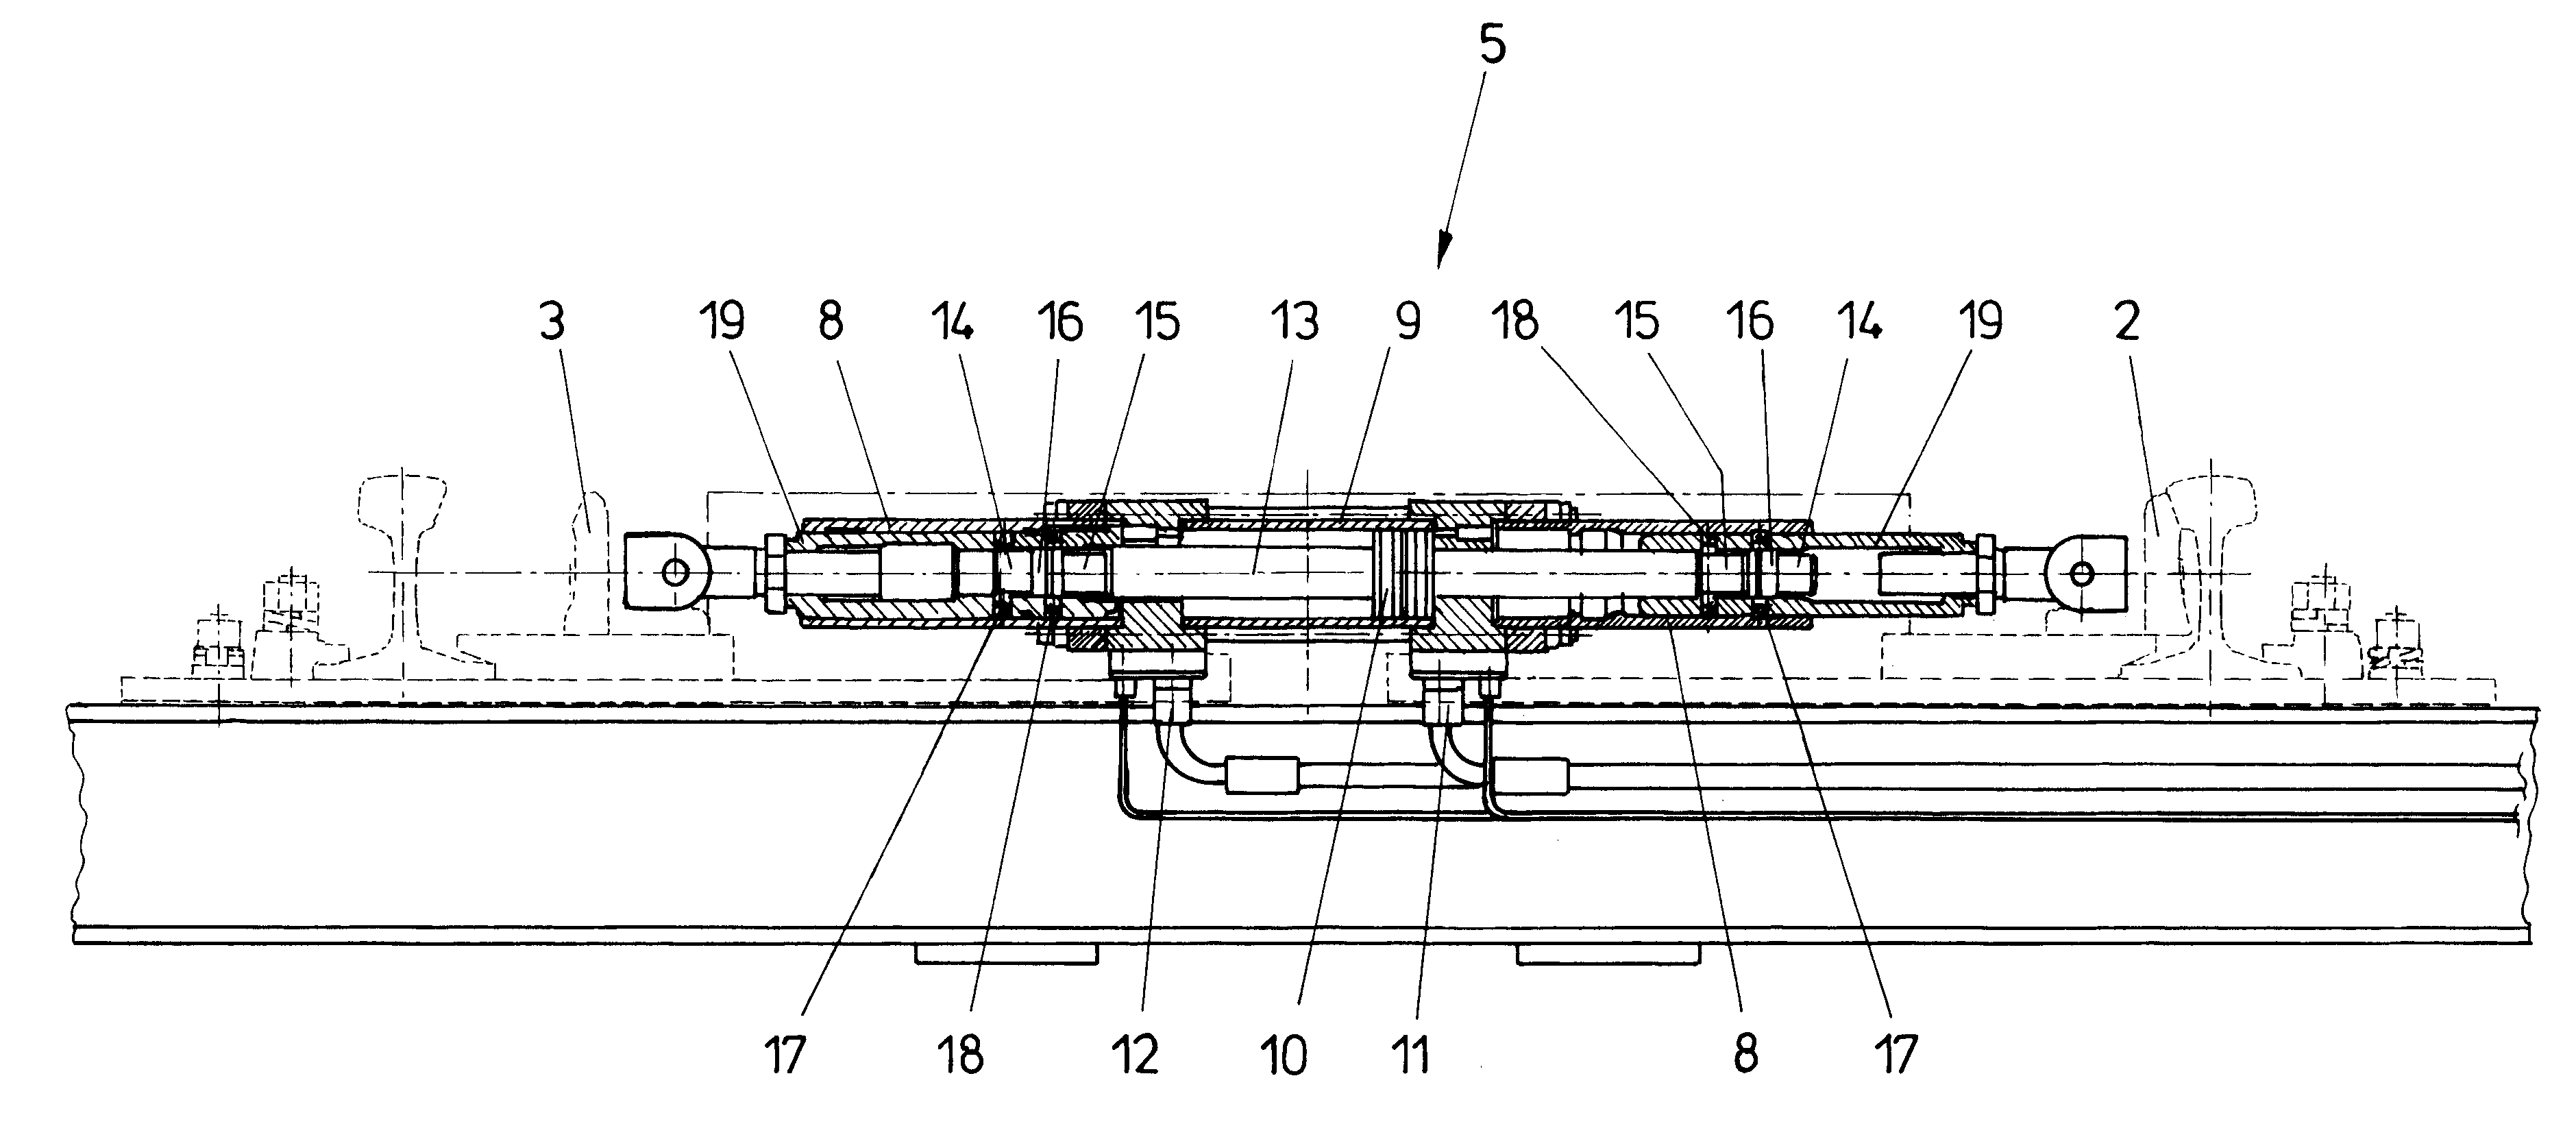 Device for locking end positions of mobile switch parts